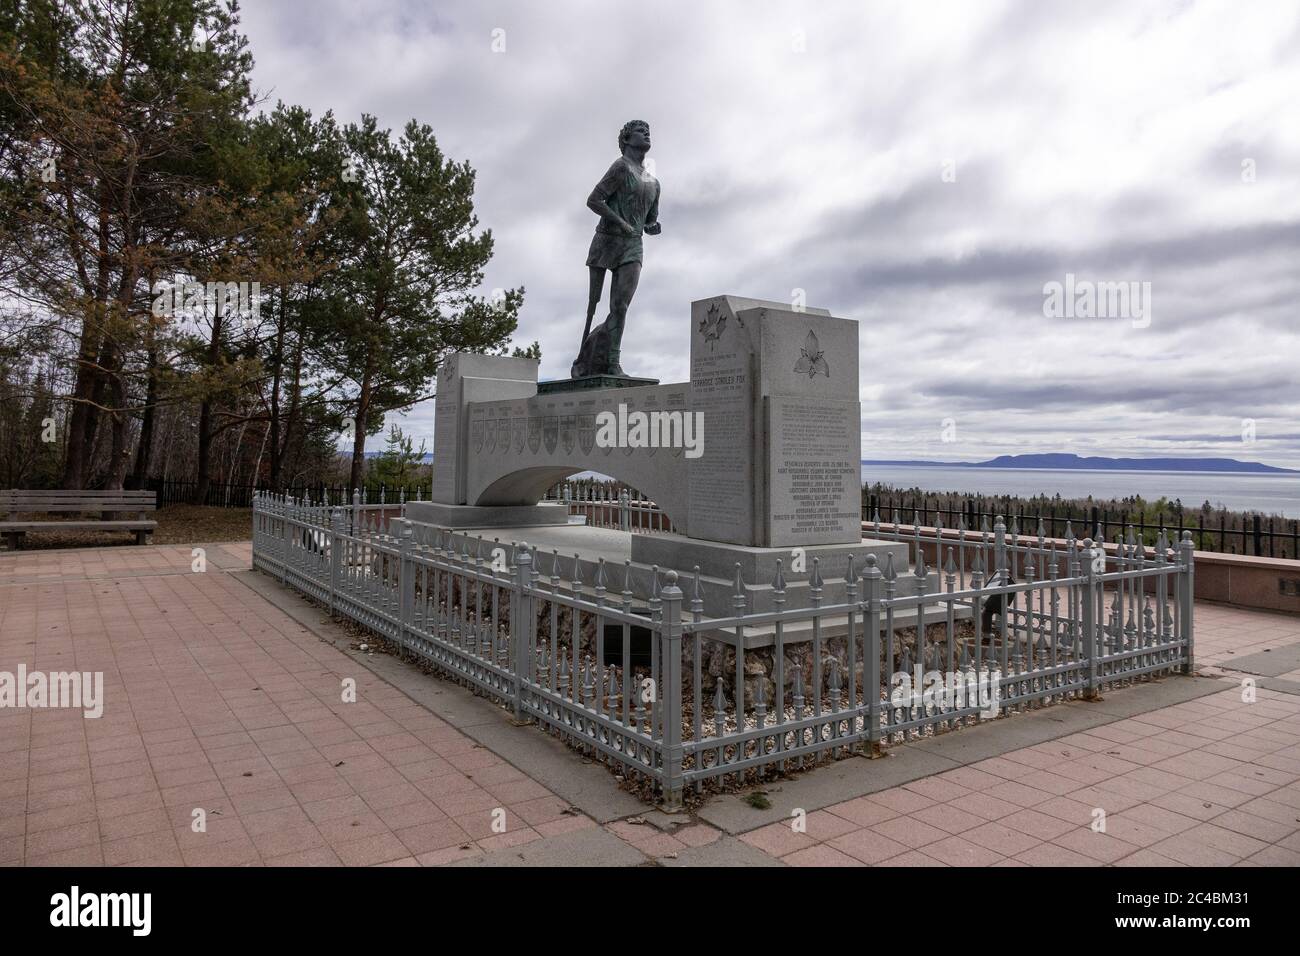 The Terry Fox Memorial On The Trans Canada Highway At Thunder Bay Ontario Canada Stock Photo